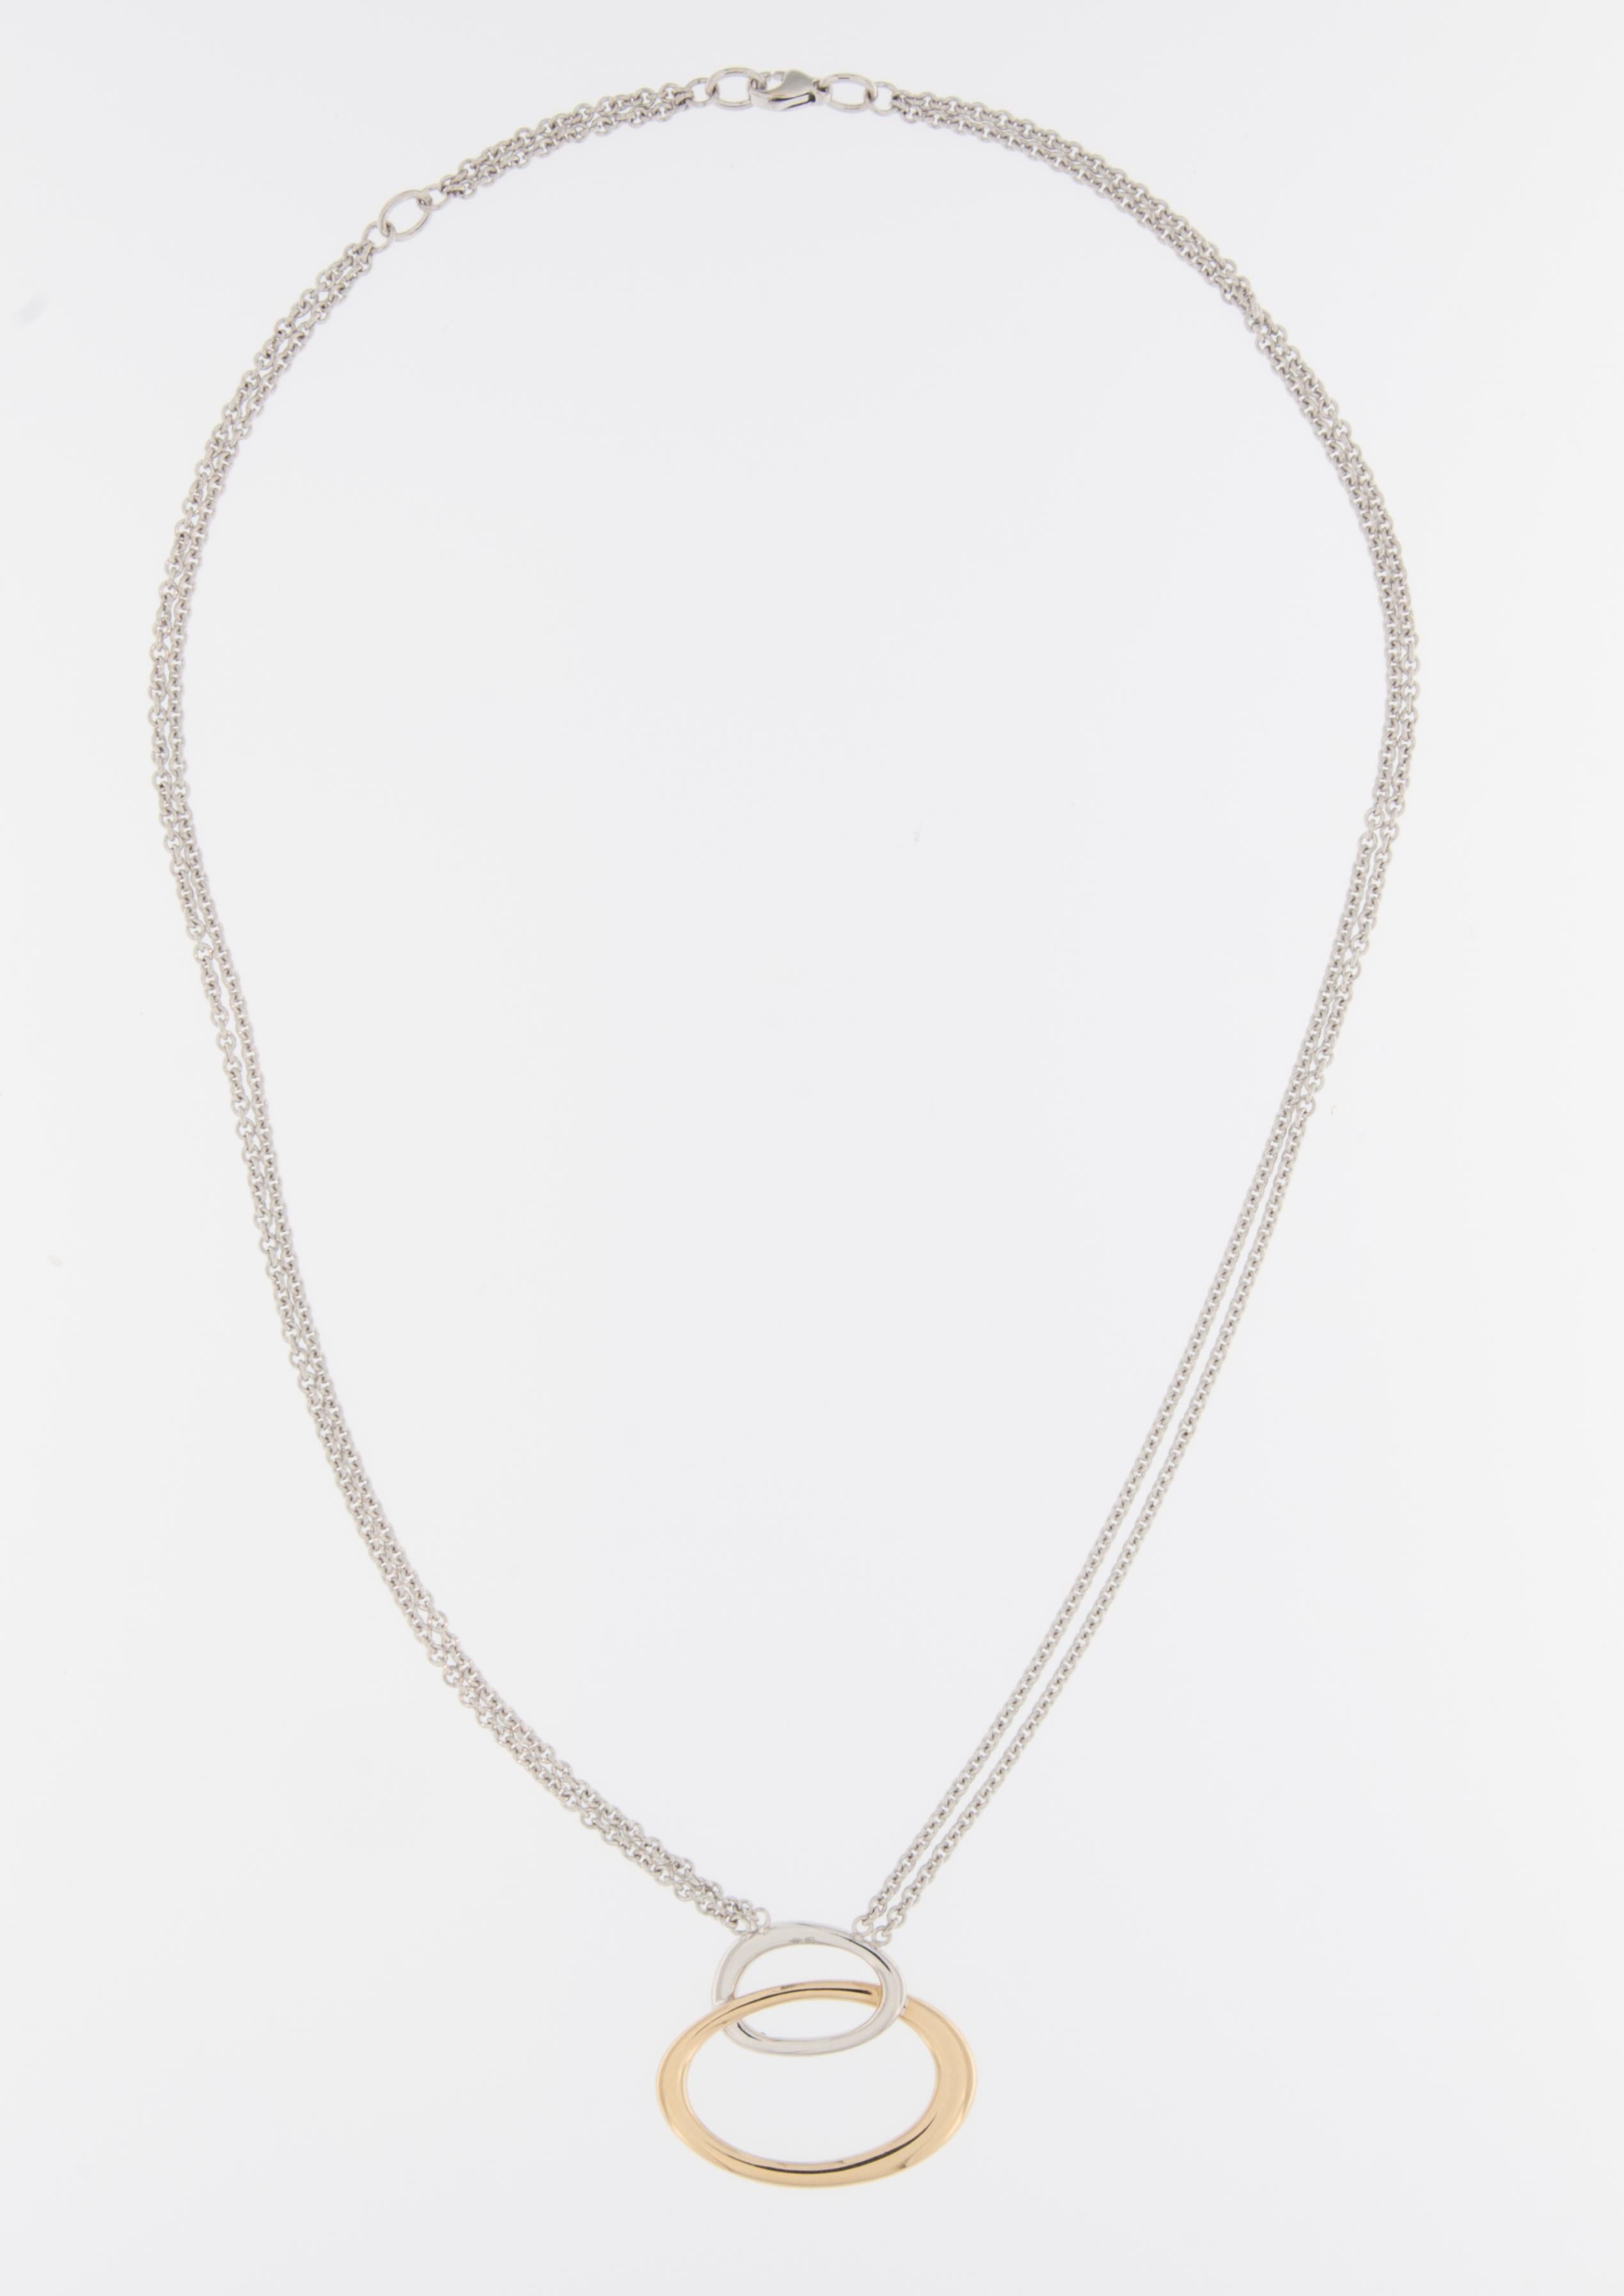 The Italian Necklace is an exquisite piece of jewelry crafted with meticulous attention to detail. 

This necklace is made from 18kt yellow and white gold, showcasing a stunning combination of two precious metals. The use of yellow and white gold